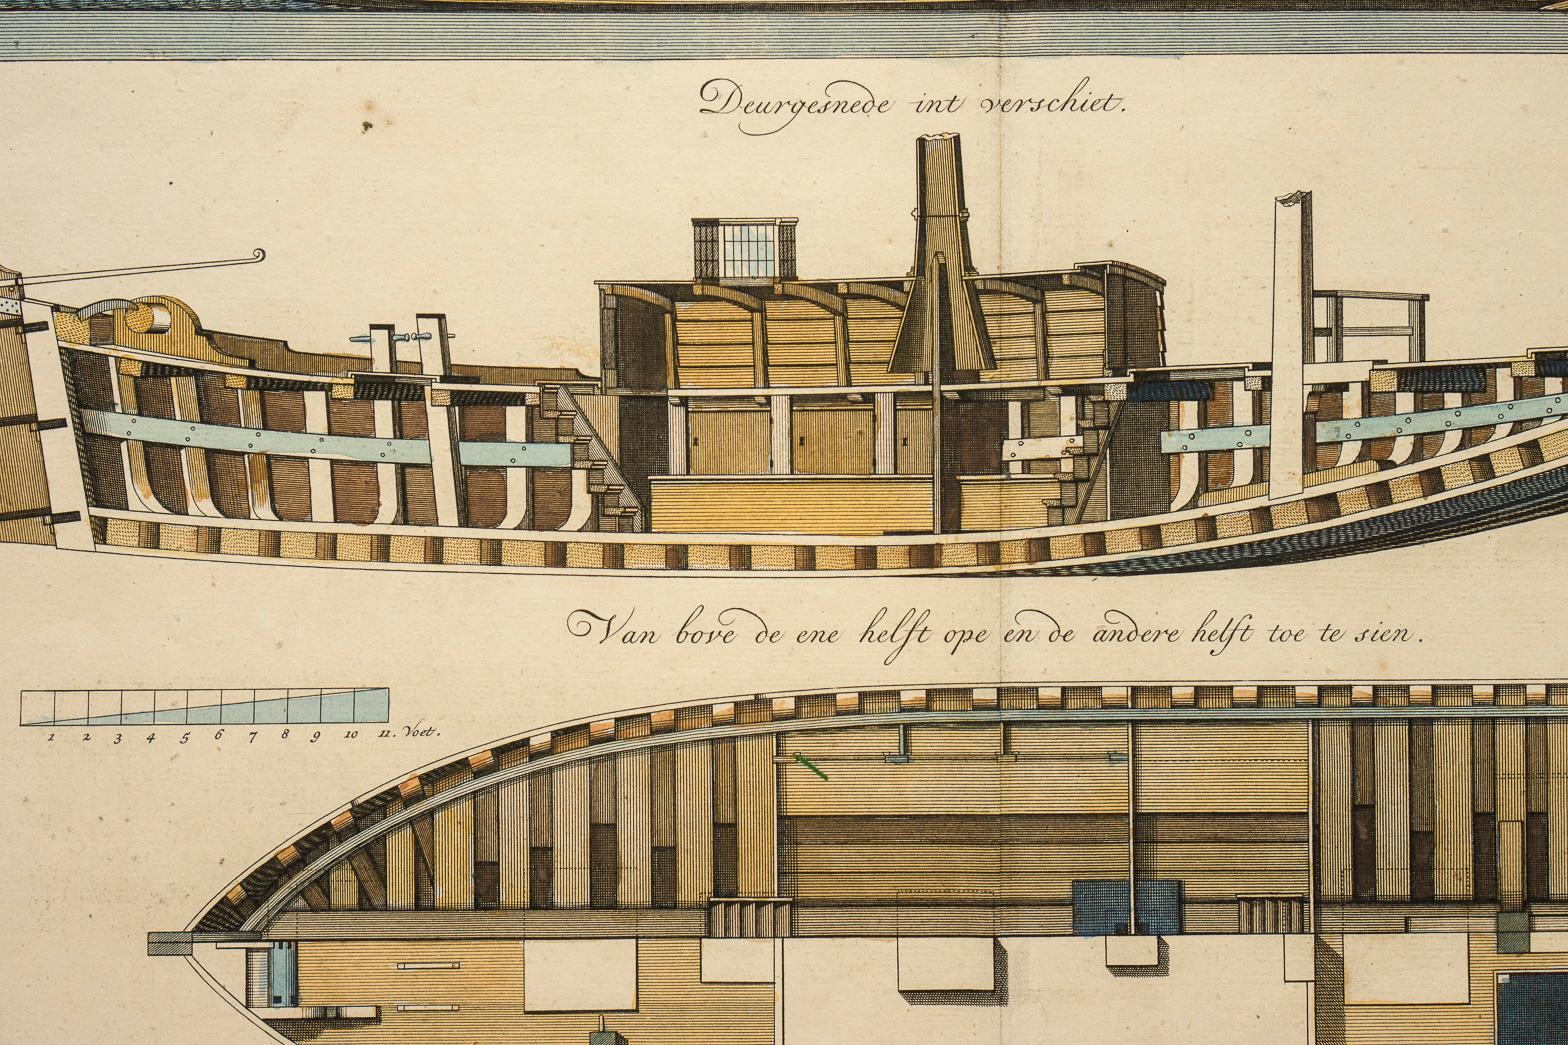 Unique engraving on laid paper with hand-coloring by Tileman van der Horst (Dutch, active 18th century) illustrating a three-quarters, cross-section, and top view of a barge designed for breaking the ice on the canals.  This illustration was one of